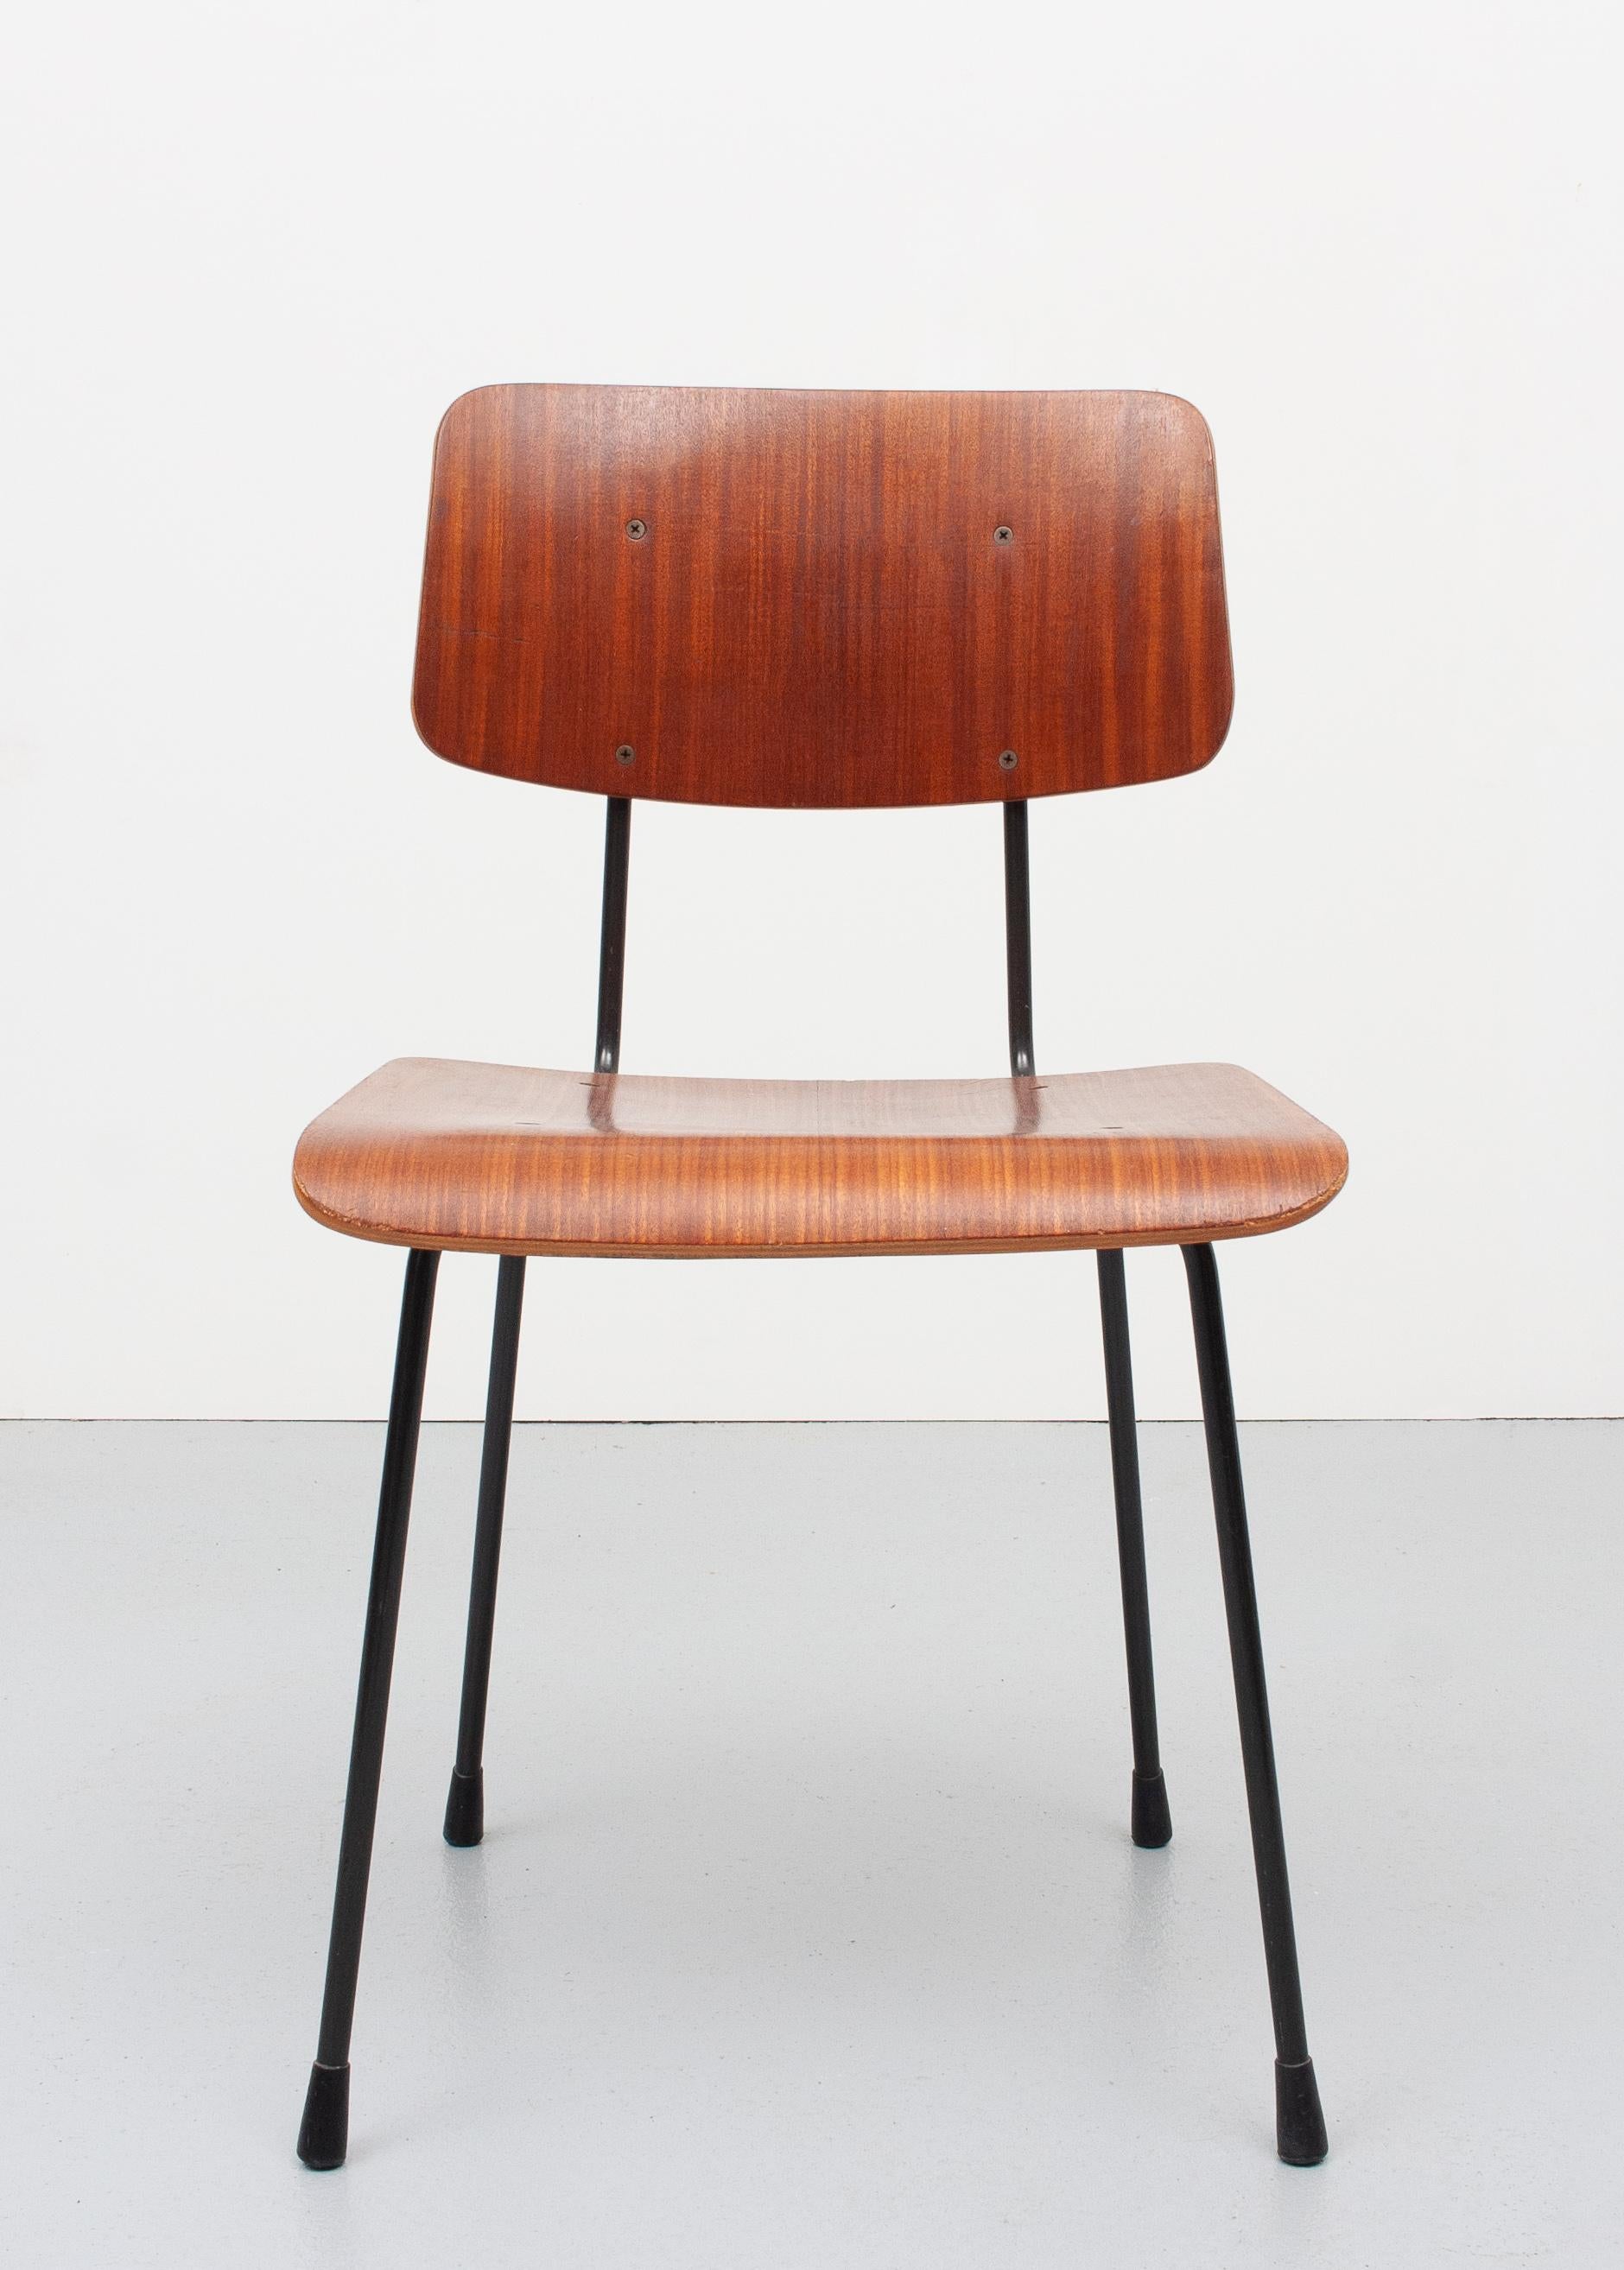 Very nice chair by AR Cordemijer for Gispen 'The frame forms a handle behind the backrest. This allowed the chair to be moved easily. The thin Black round steel of the frame gives the chair a sleek look. Teak plywood seat and back rest. Very good